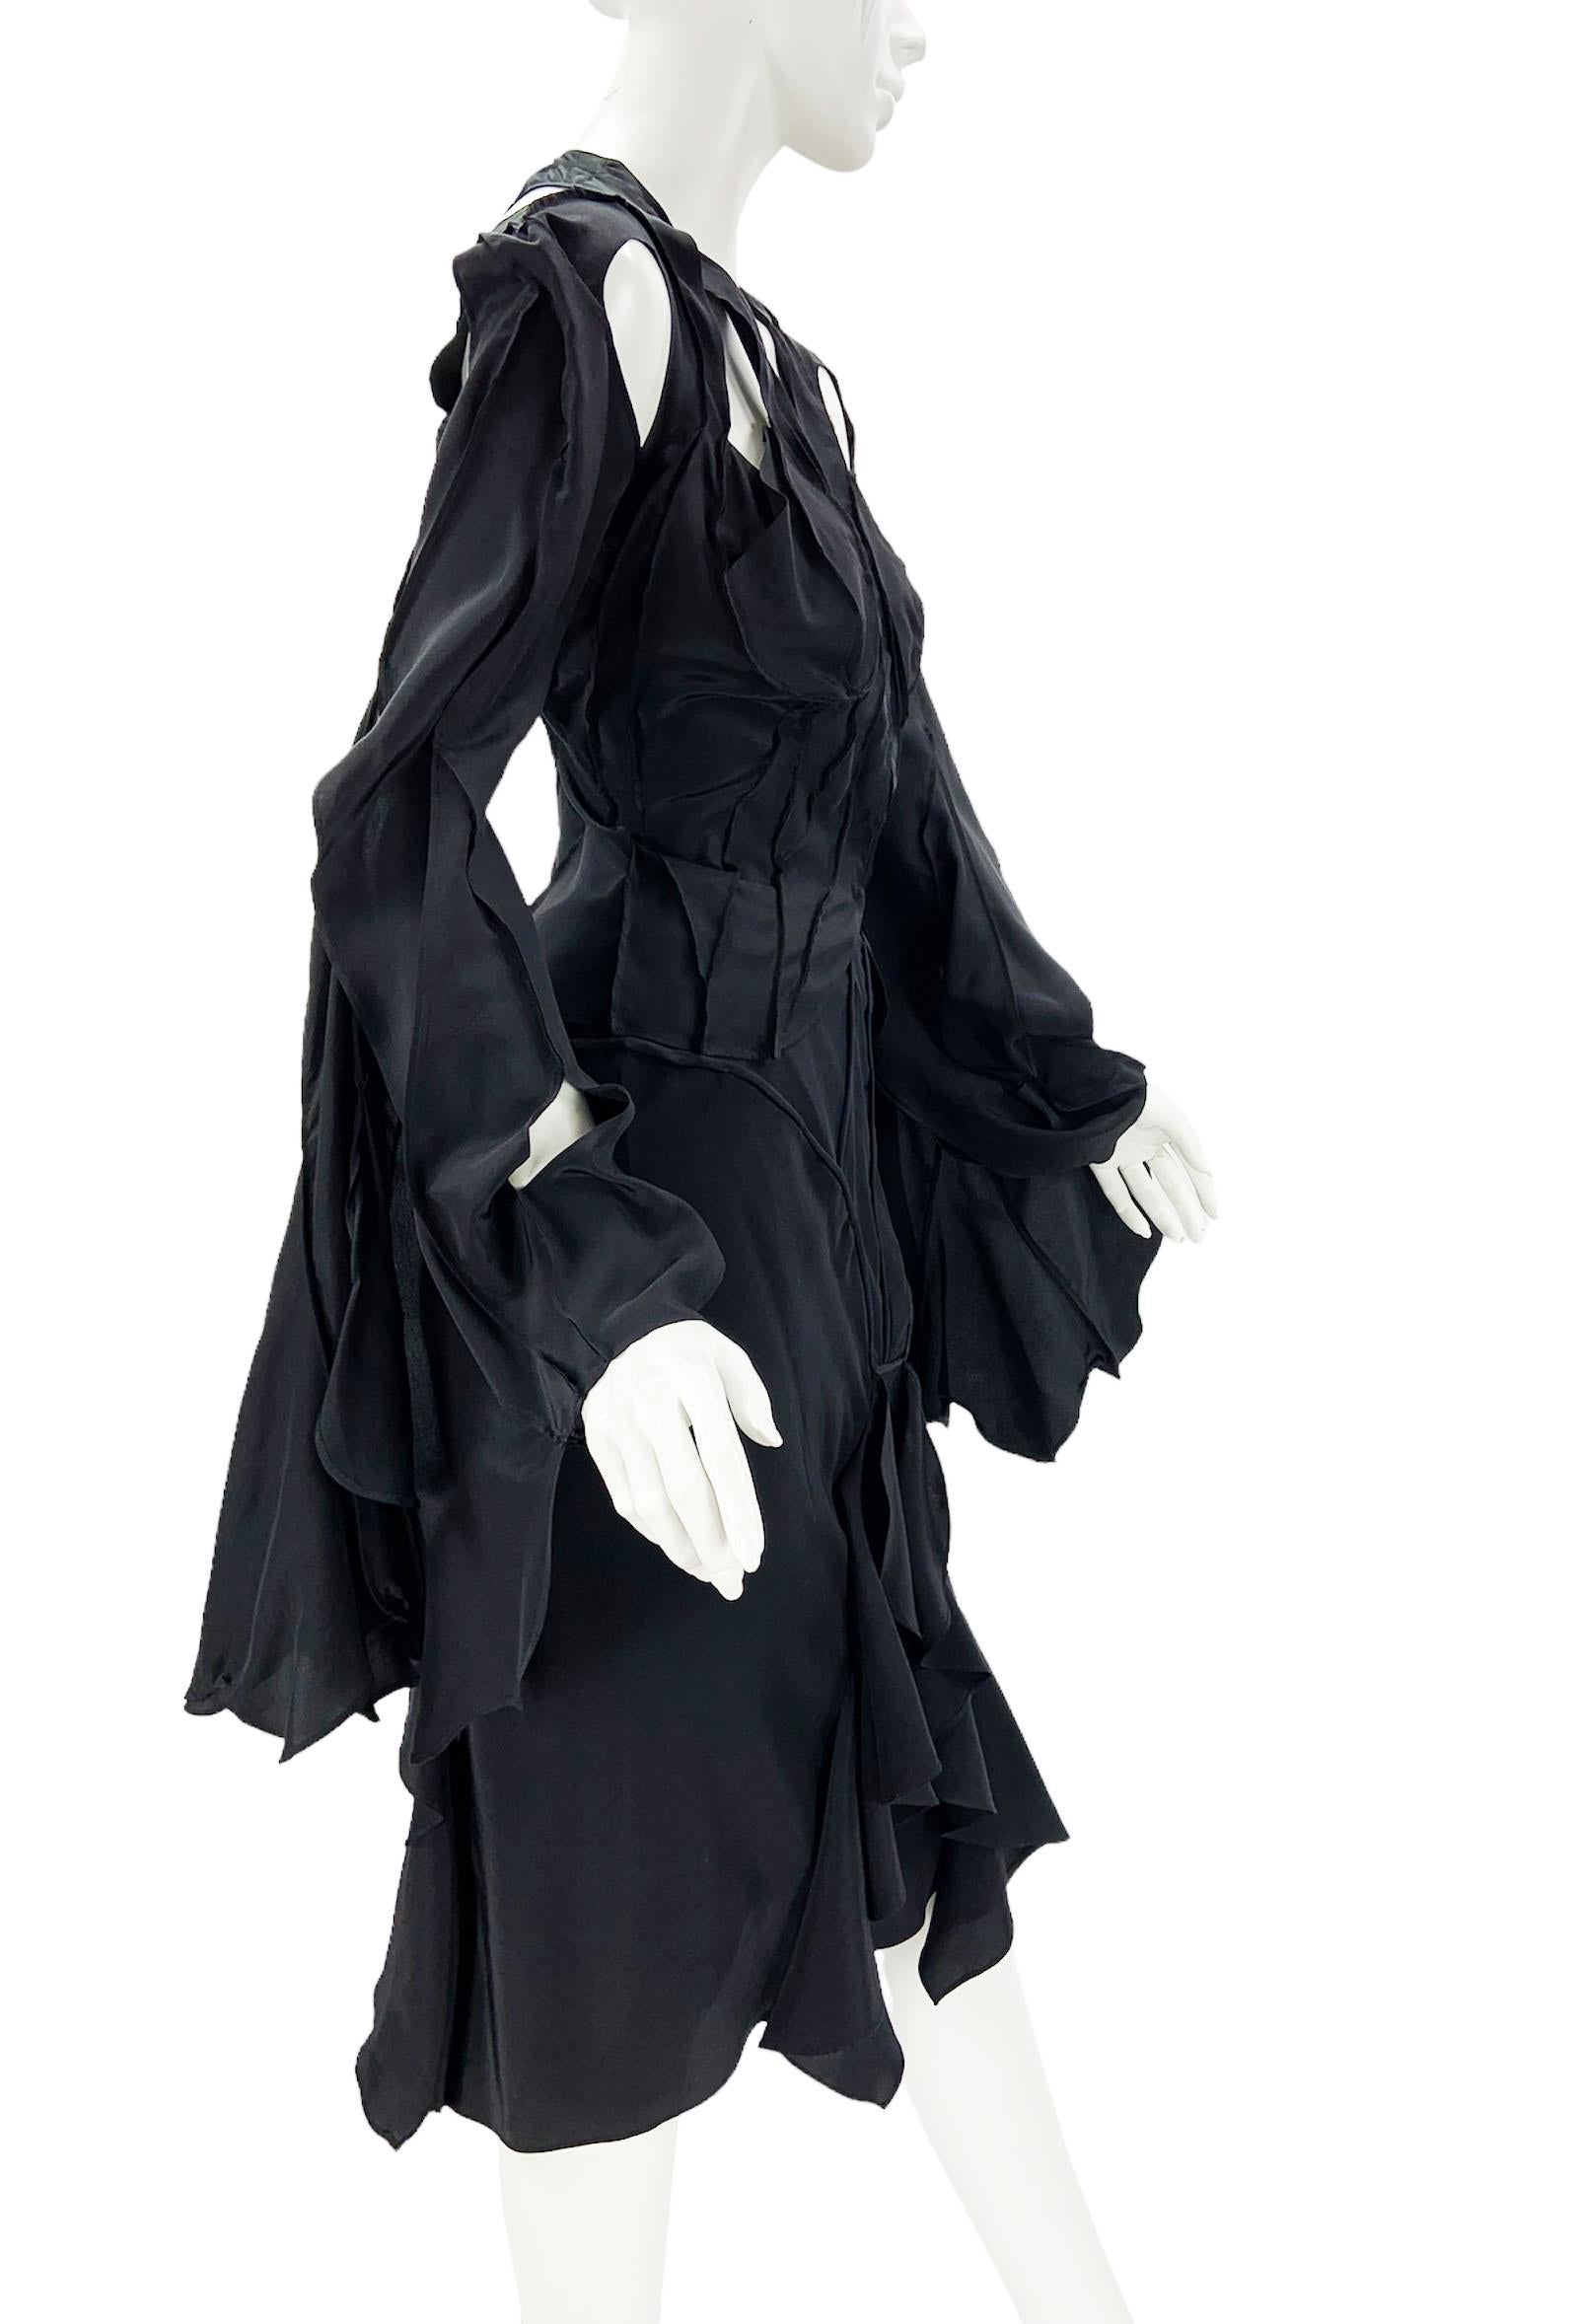 Tom Ford for Yves Saint Laurent S/S 2003 Silk Black Skirt Suit French 38 - US 6 In Excellent Condition For Sale In Montgomery, TX